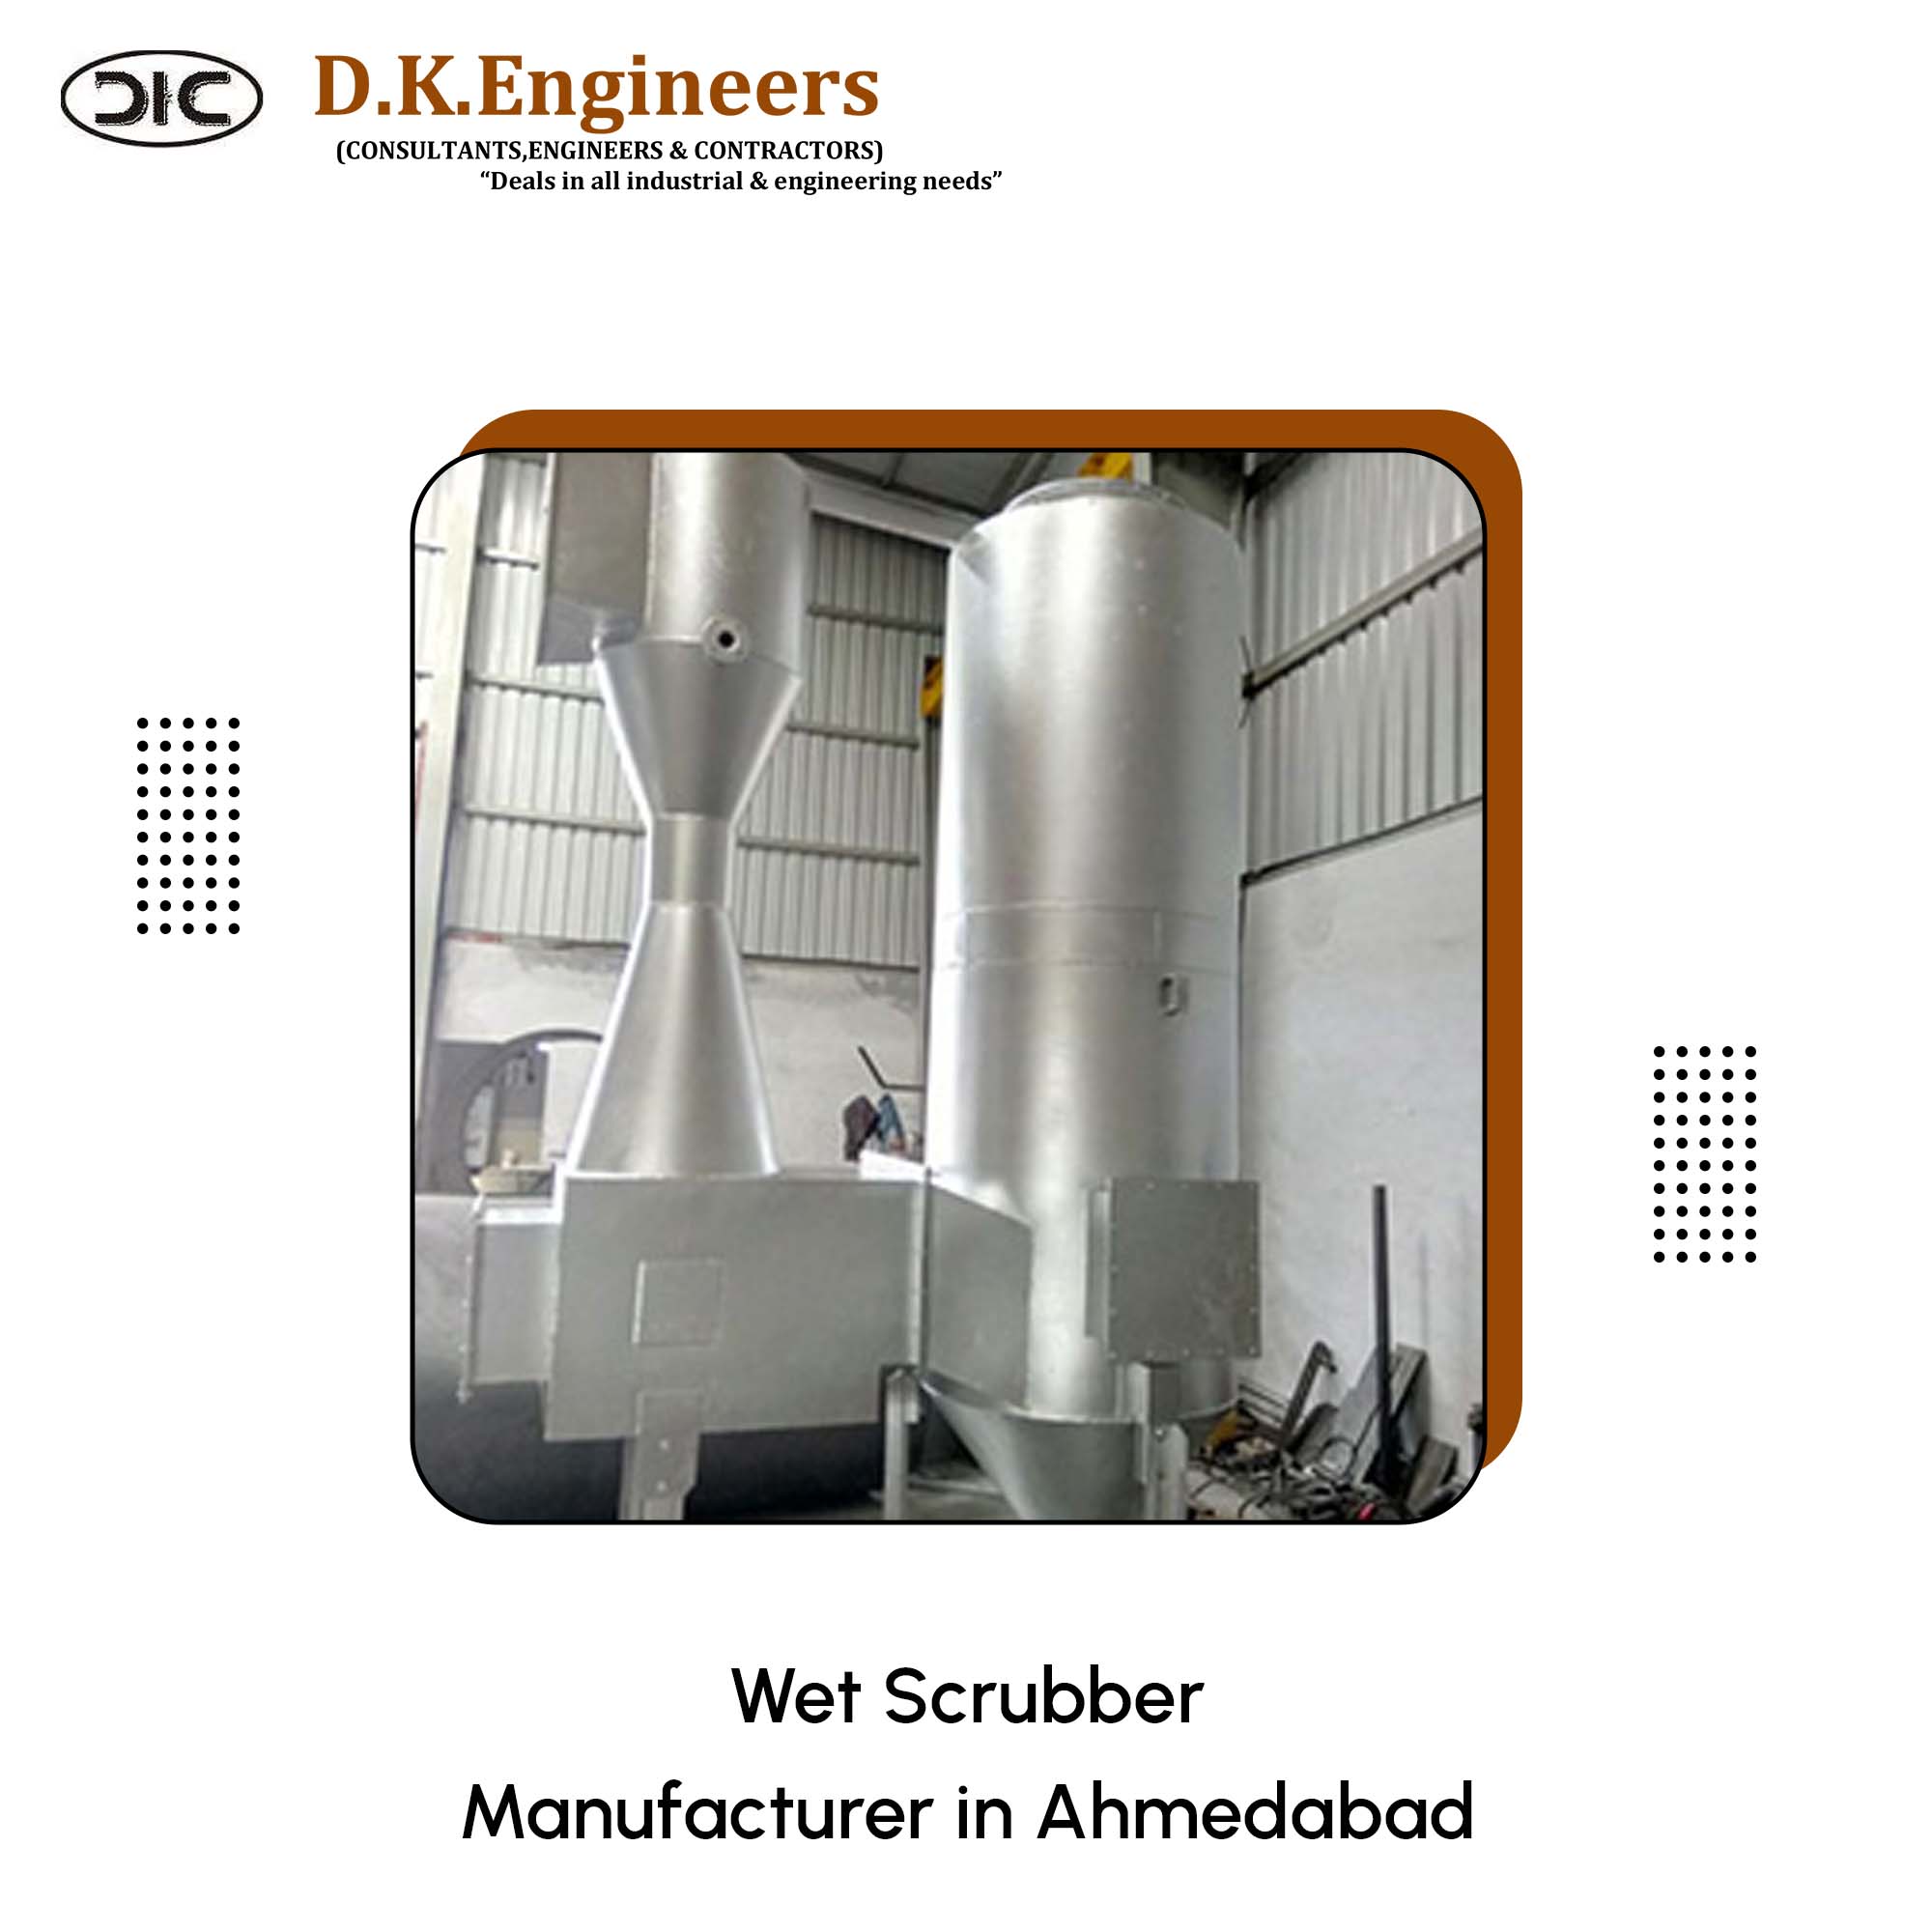 Wet Scrubber Manufacturer in Ahmedabad